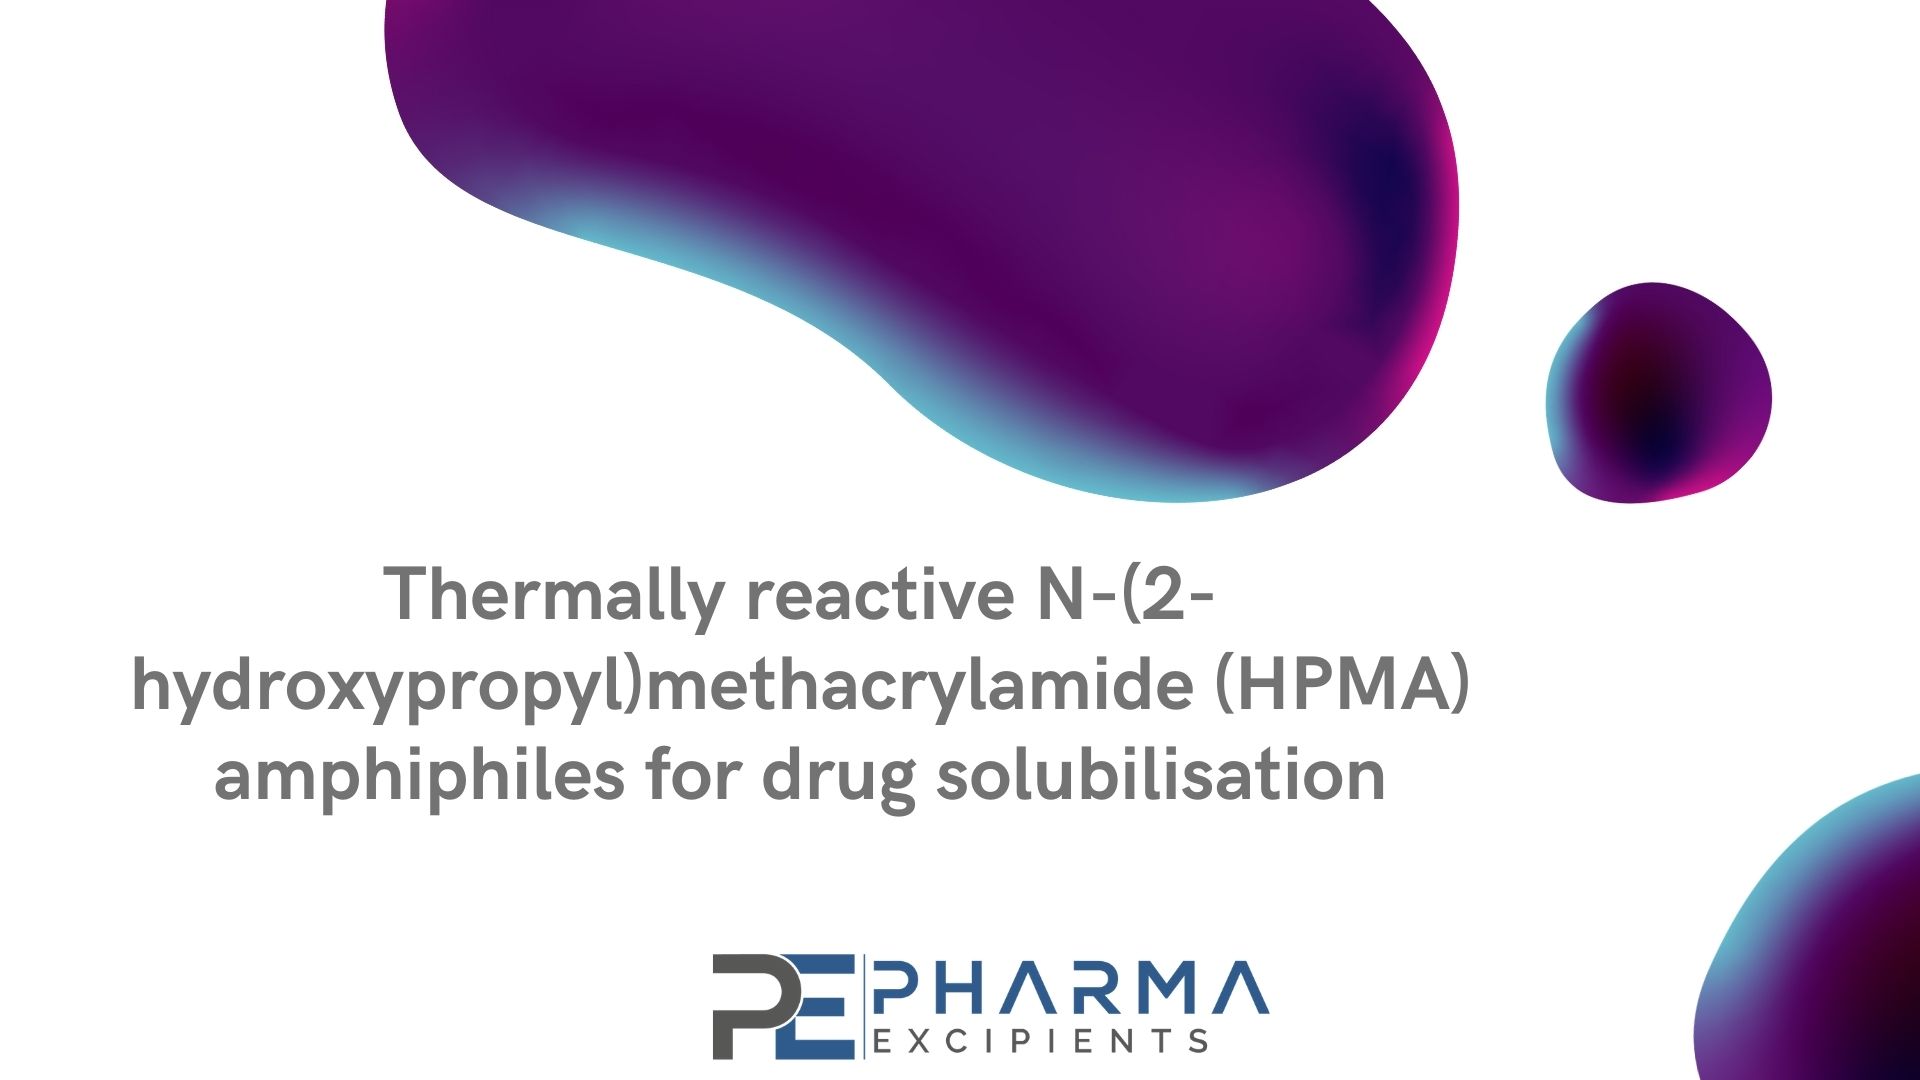 Thermally reactive N-(2-hydroxypropyl)methacrylamide (HPMA) amphiphiles for drug solubilisation